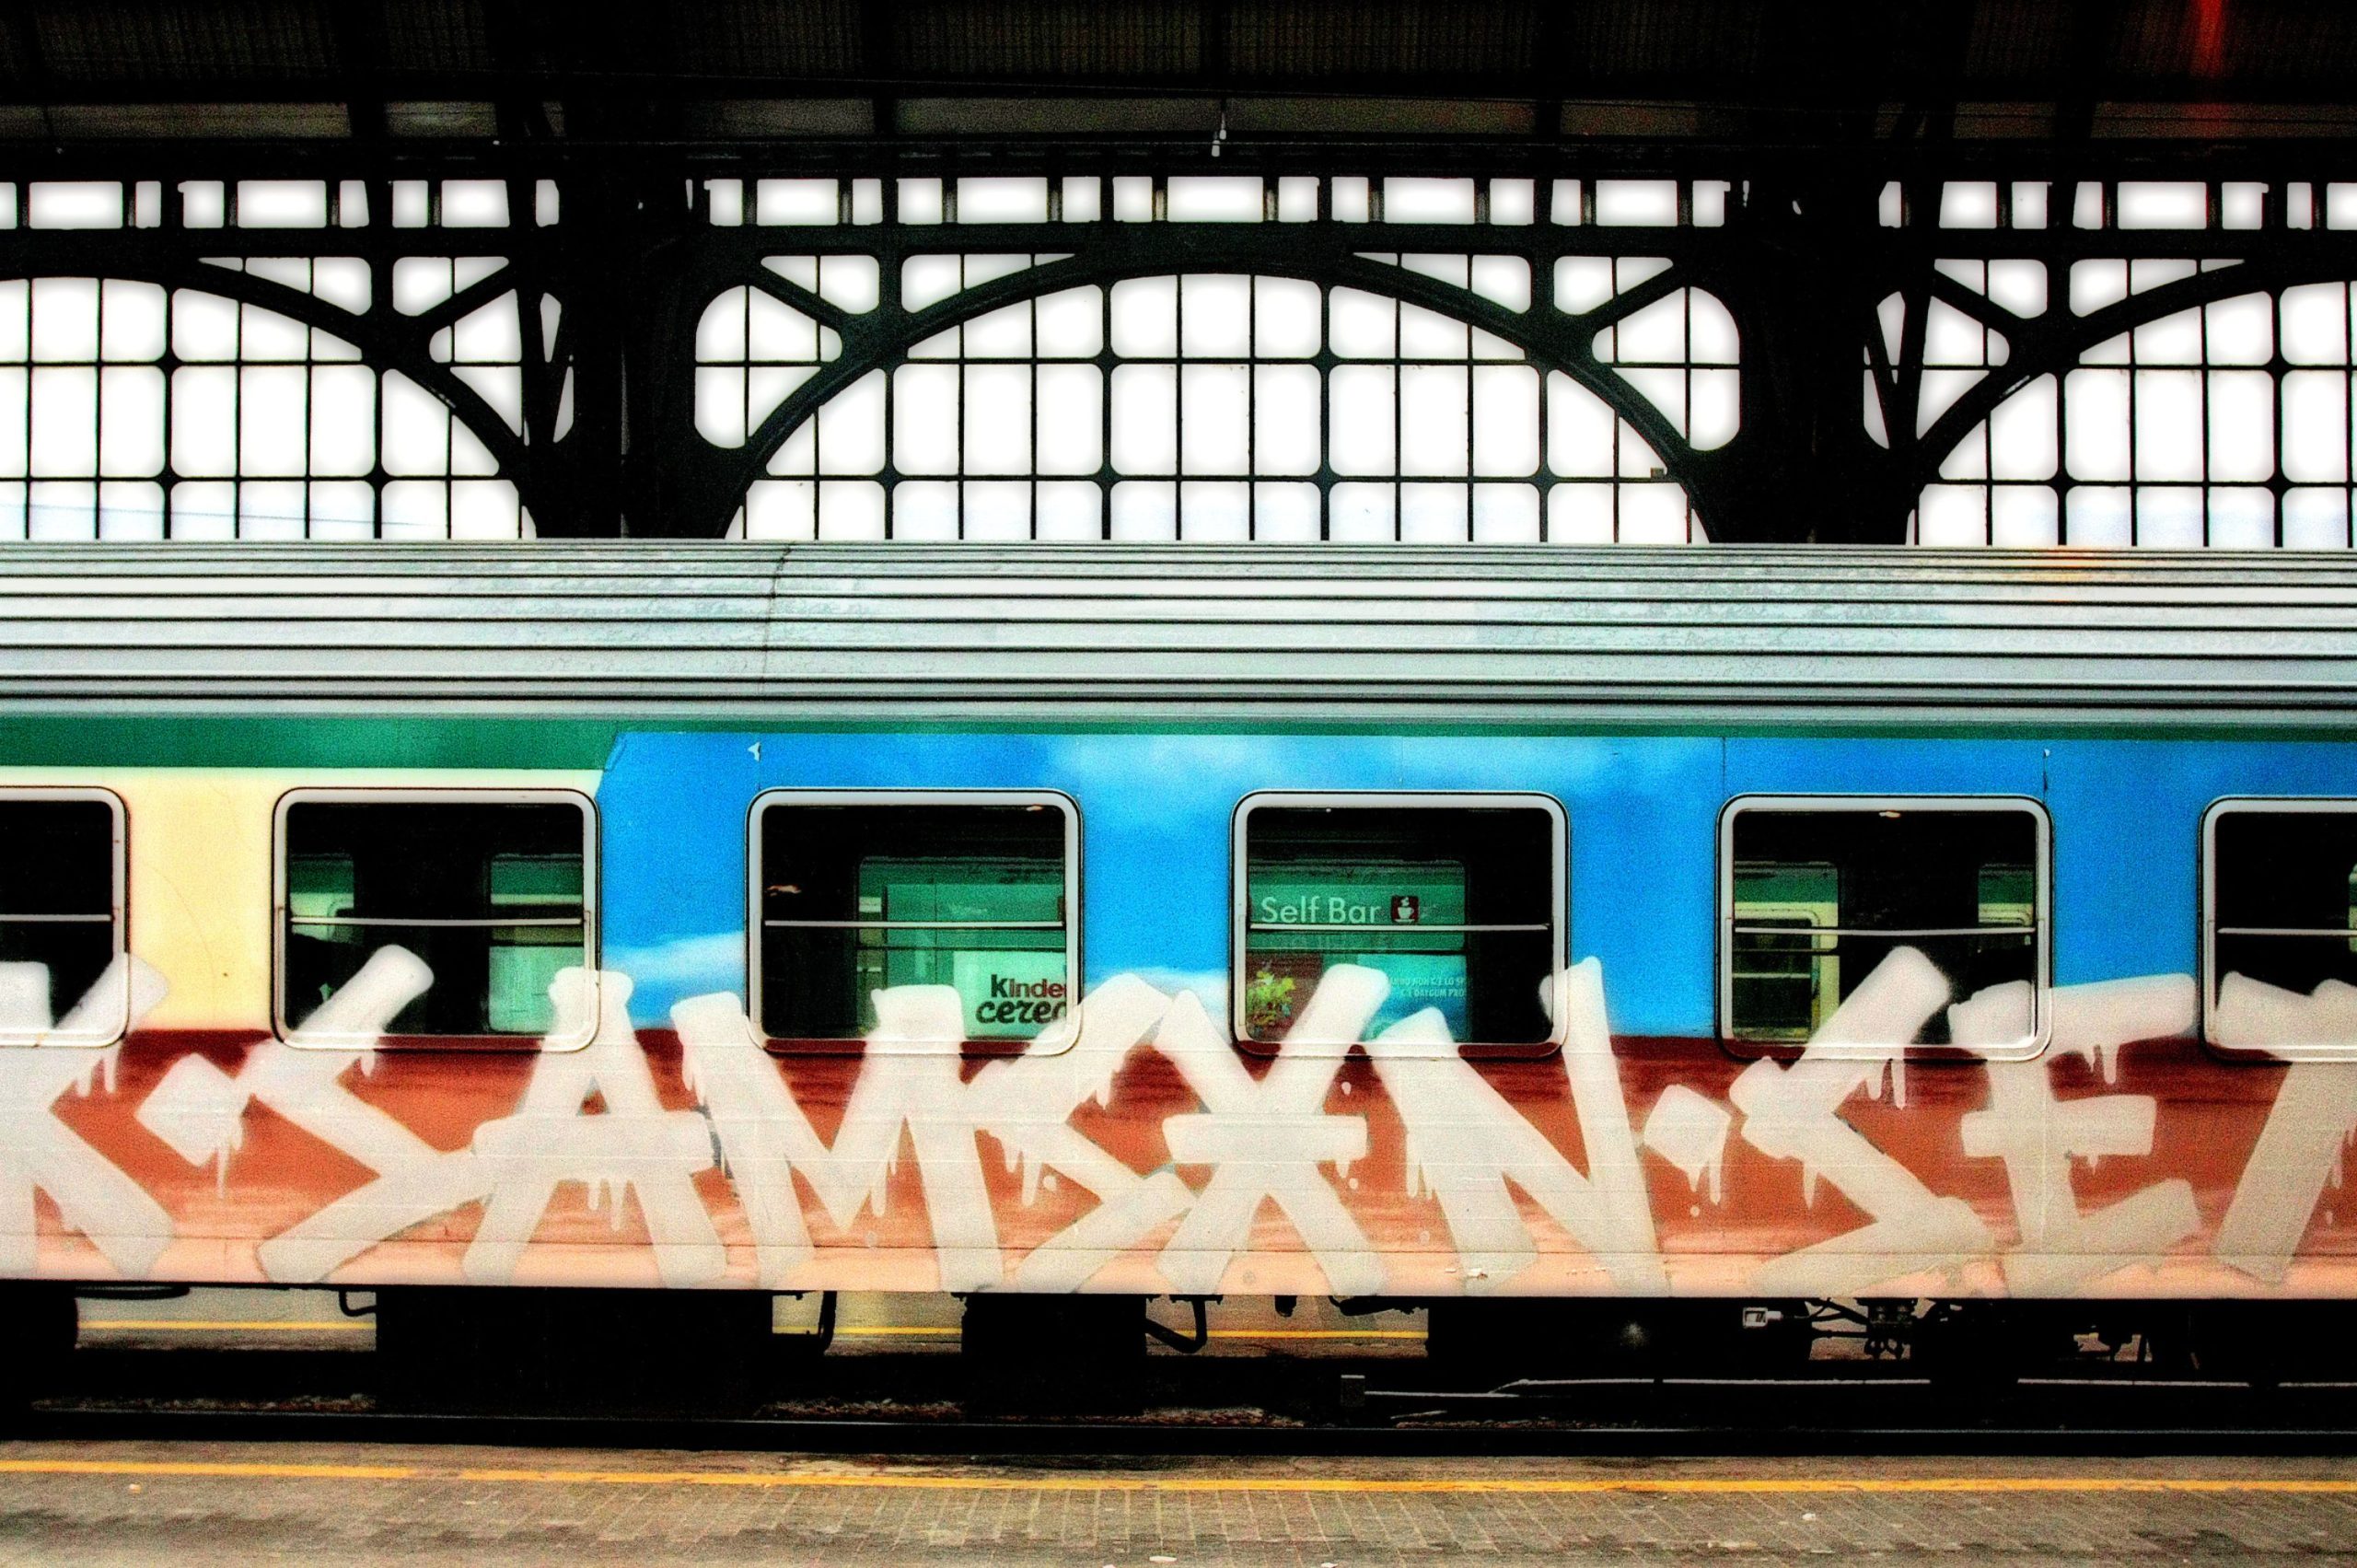 Train car covered in graffiti within a train station